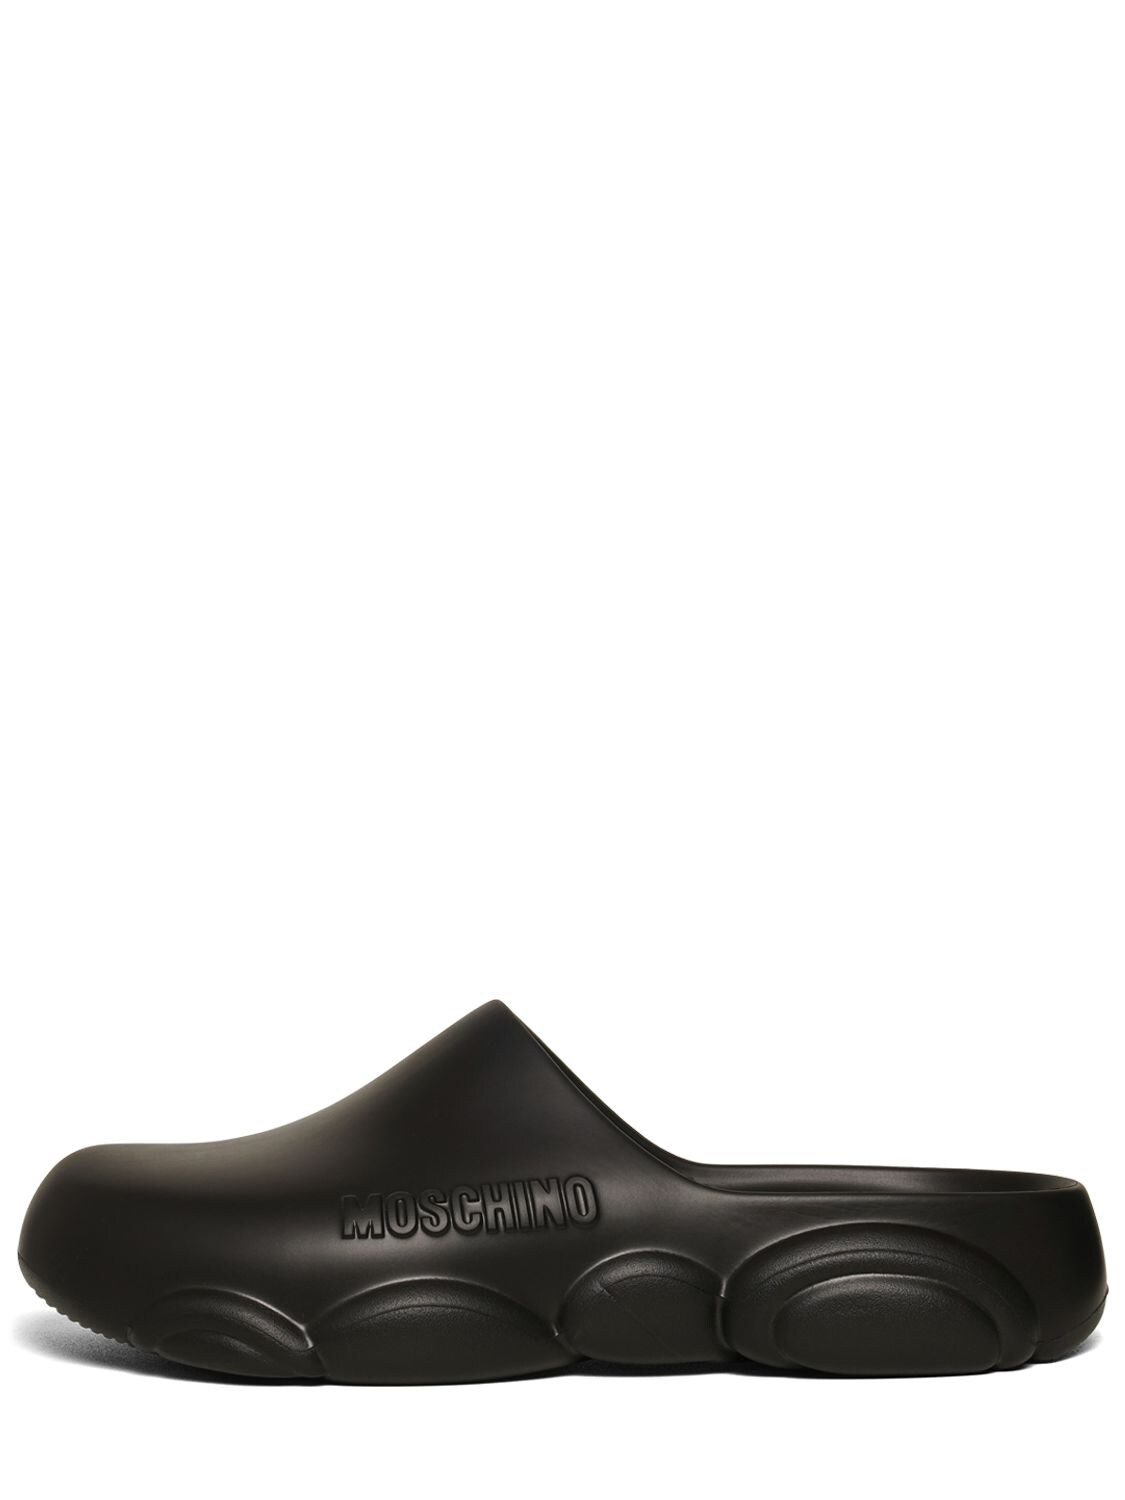 MOSCHINO TEDDY SOLE RUBBER SANDALS